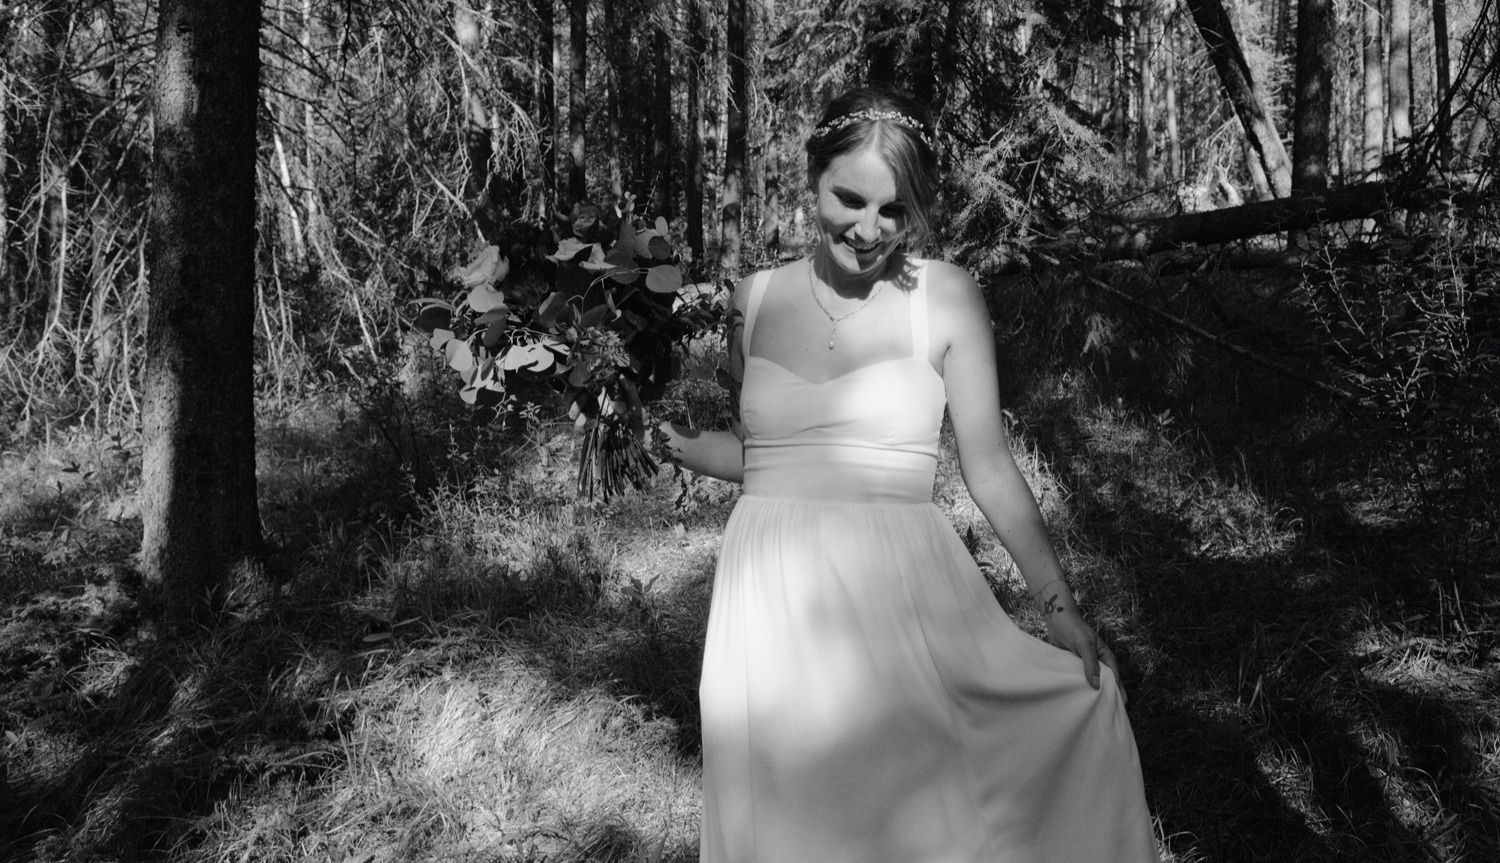 Bride dancing in dappled light of a forest